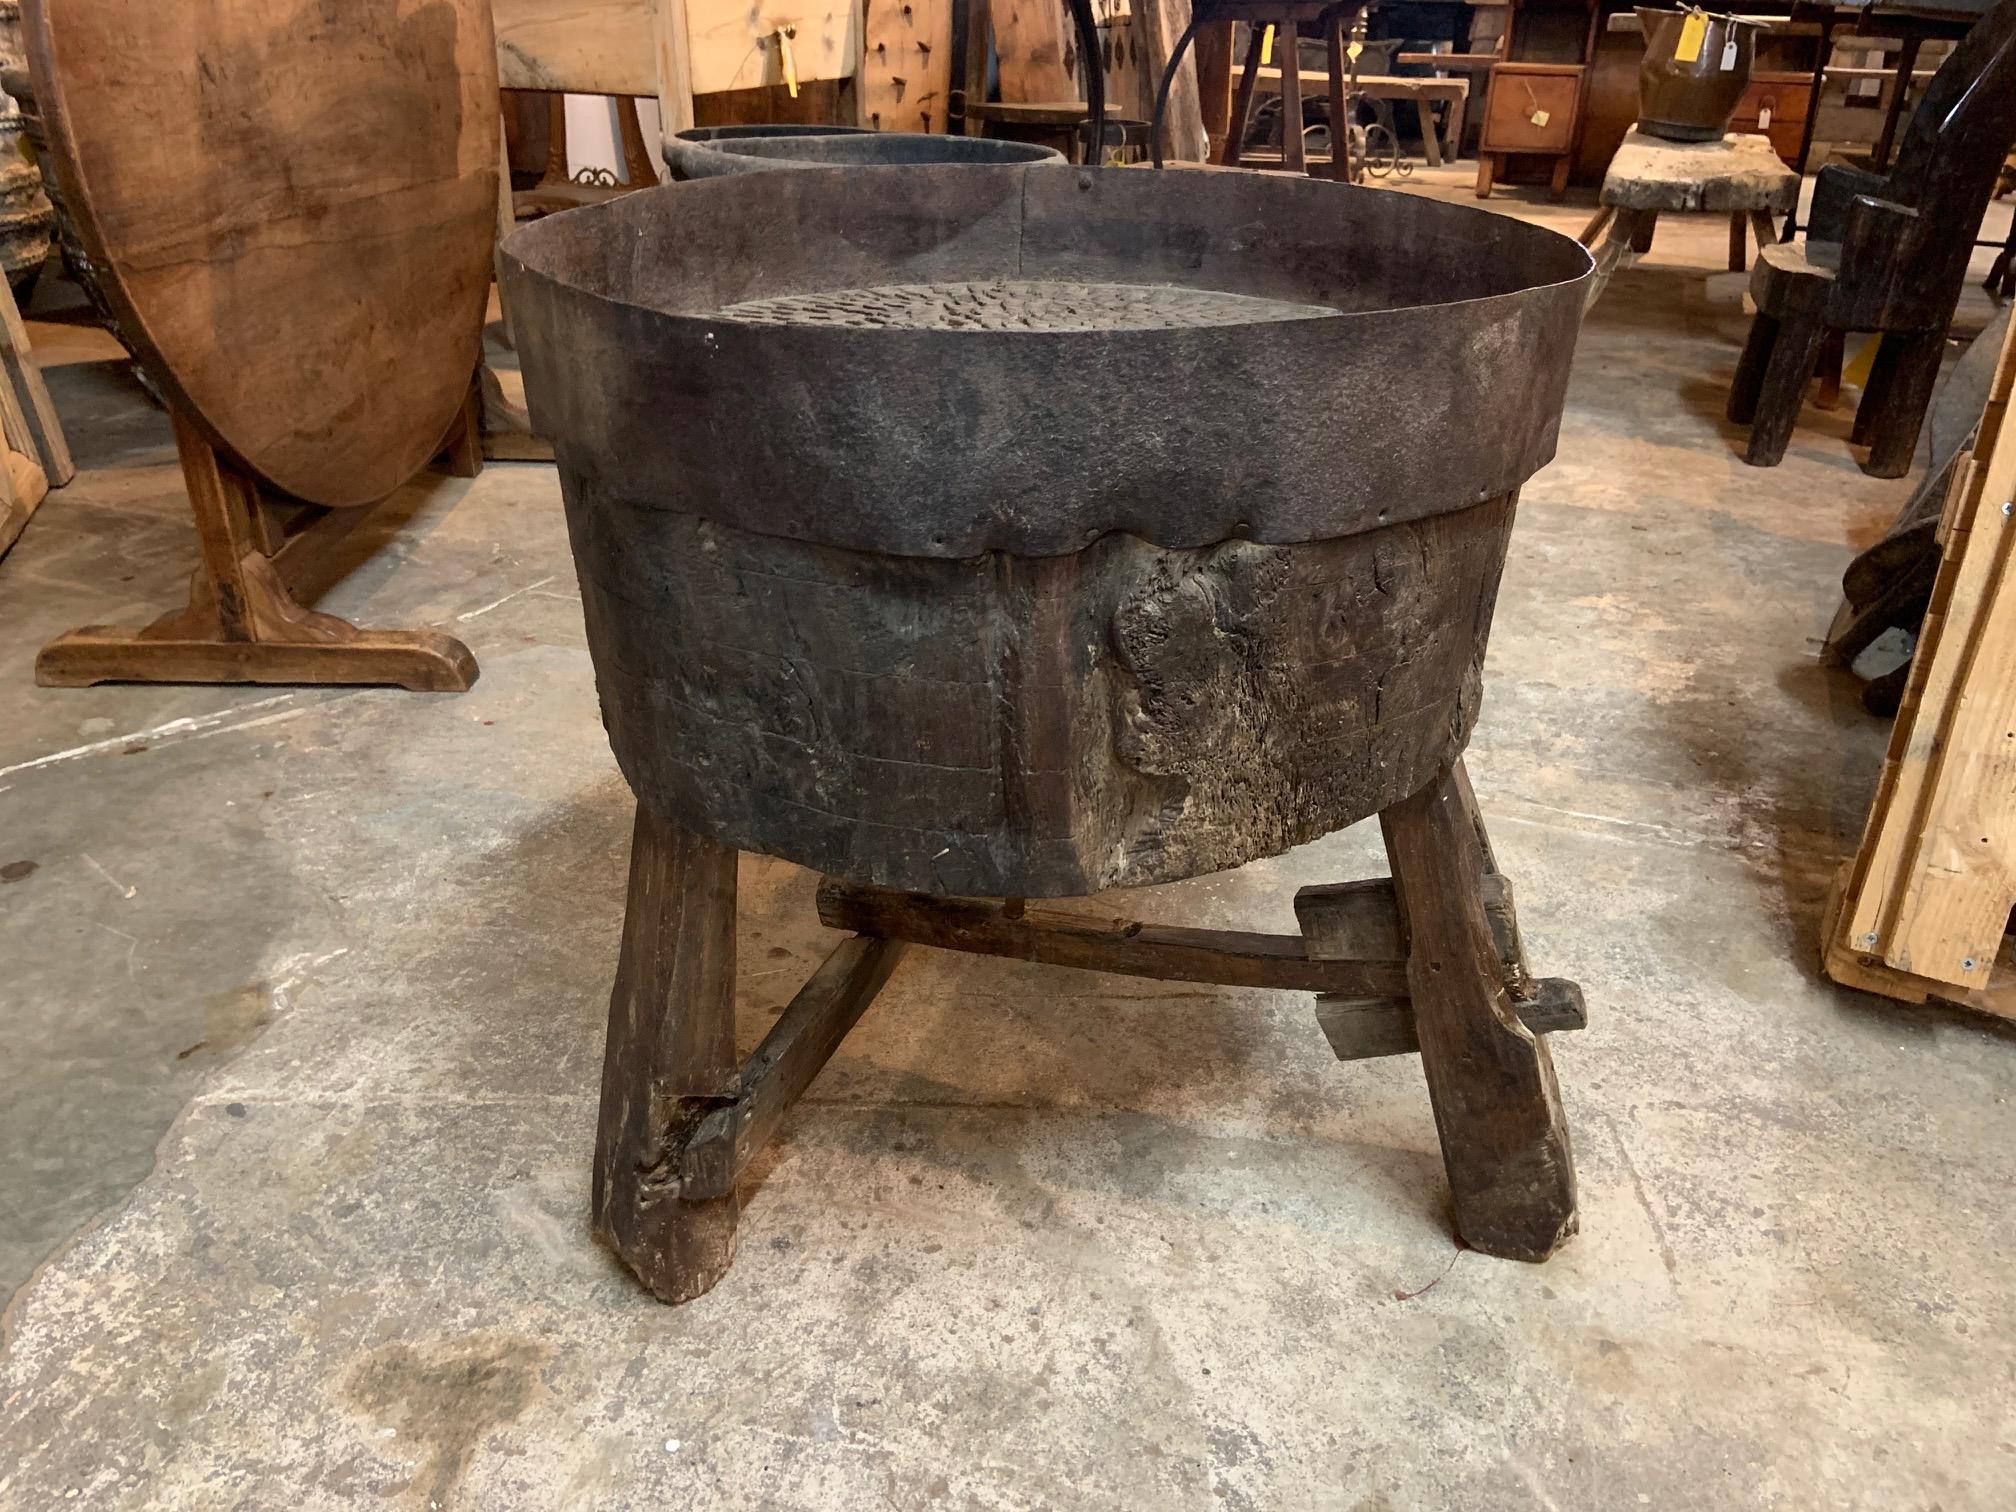 A sensational Arte Populaire Billot used for grinding grains, corn, wheat, etc. It is constructed from a massive billot, chopping block with an iron band around the top so that ground grains would not fall off. There are many iron pieces embedded